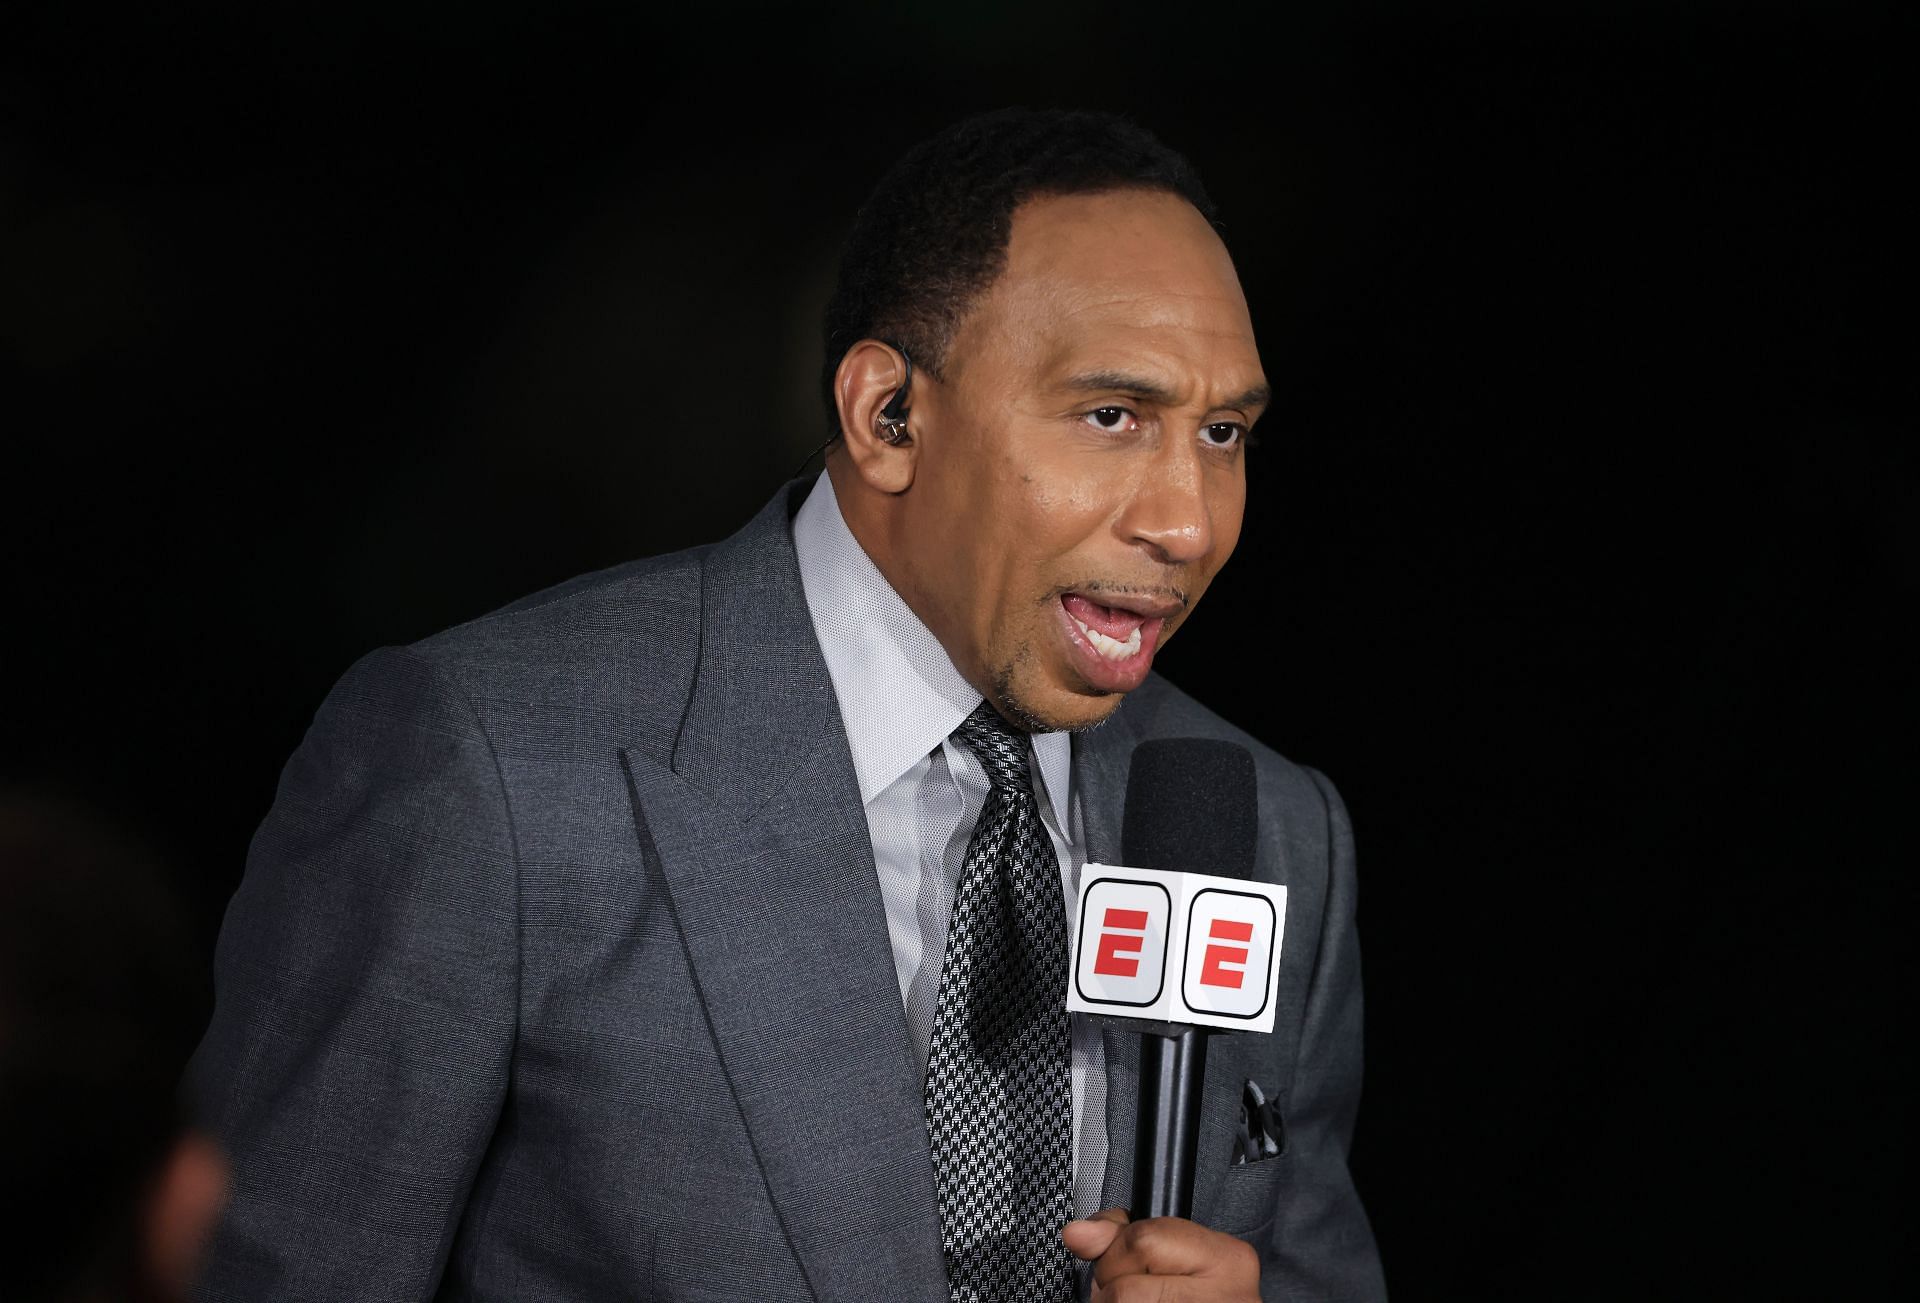 Stephen A. Smith at the NBA finals